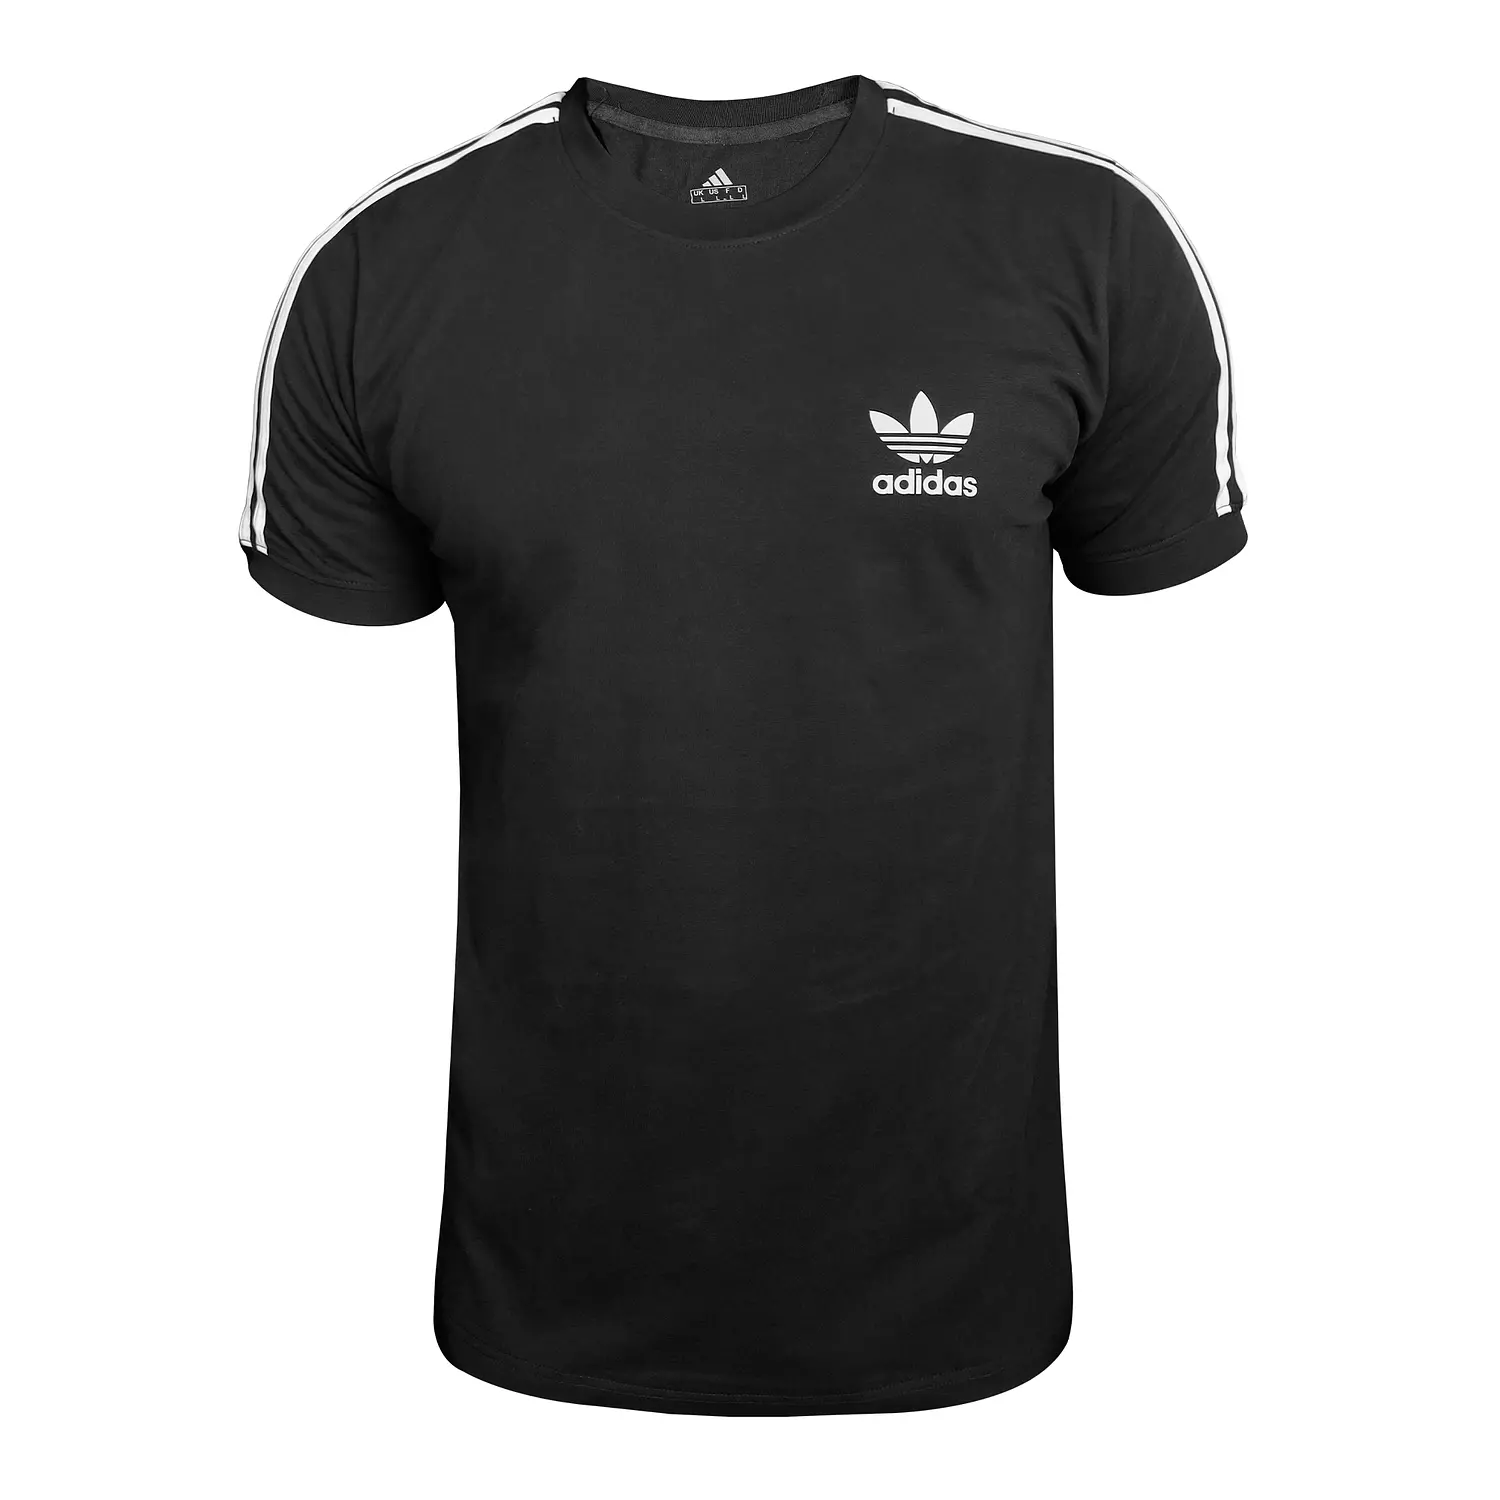 ADIDAS COTTON T-SHIRT hover image